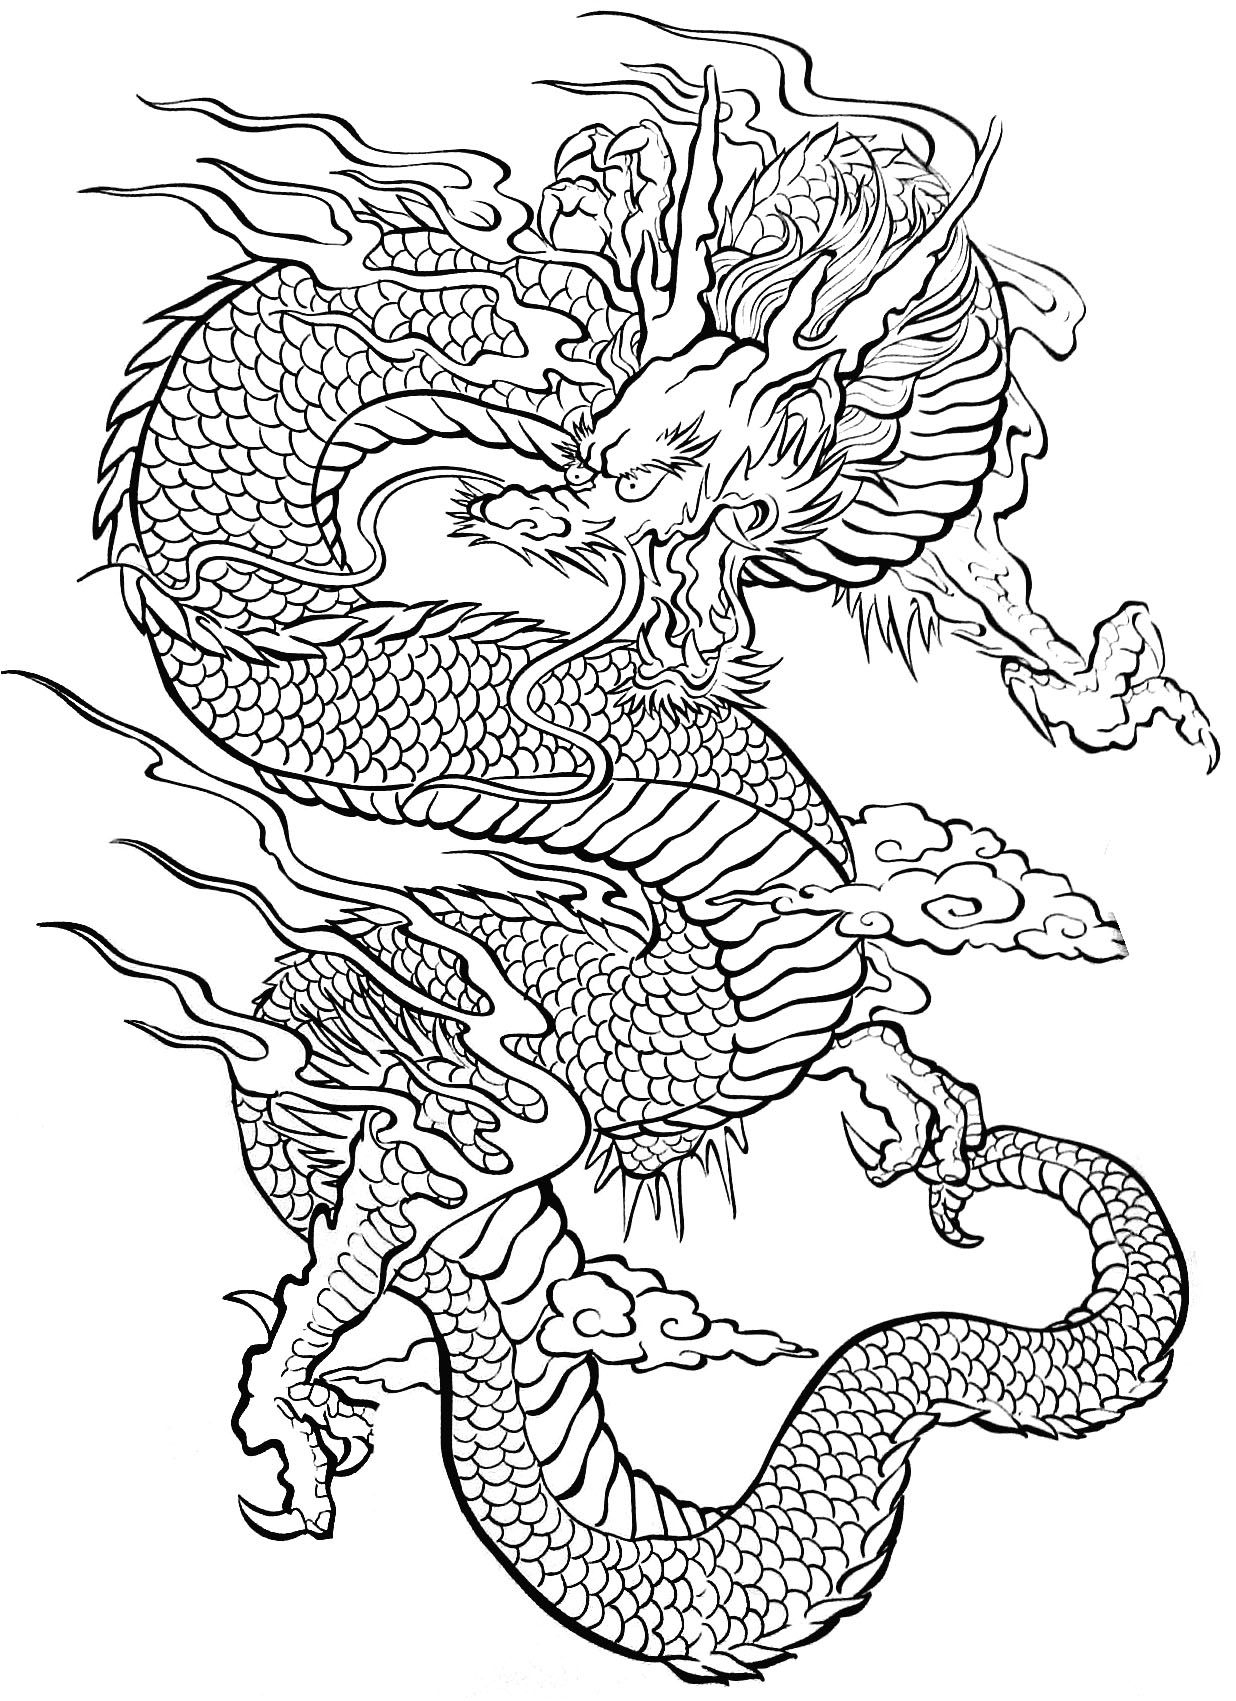 Coloriage Dragon Chinois - Greatestcoloringbook mit Coloriage Dessin Chinois